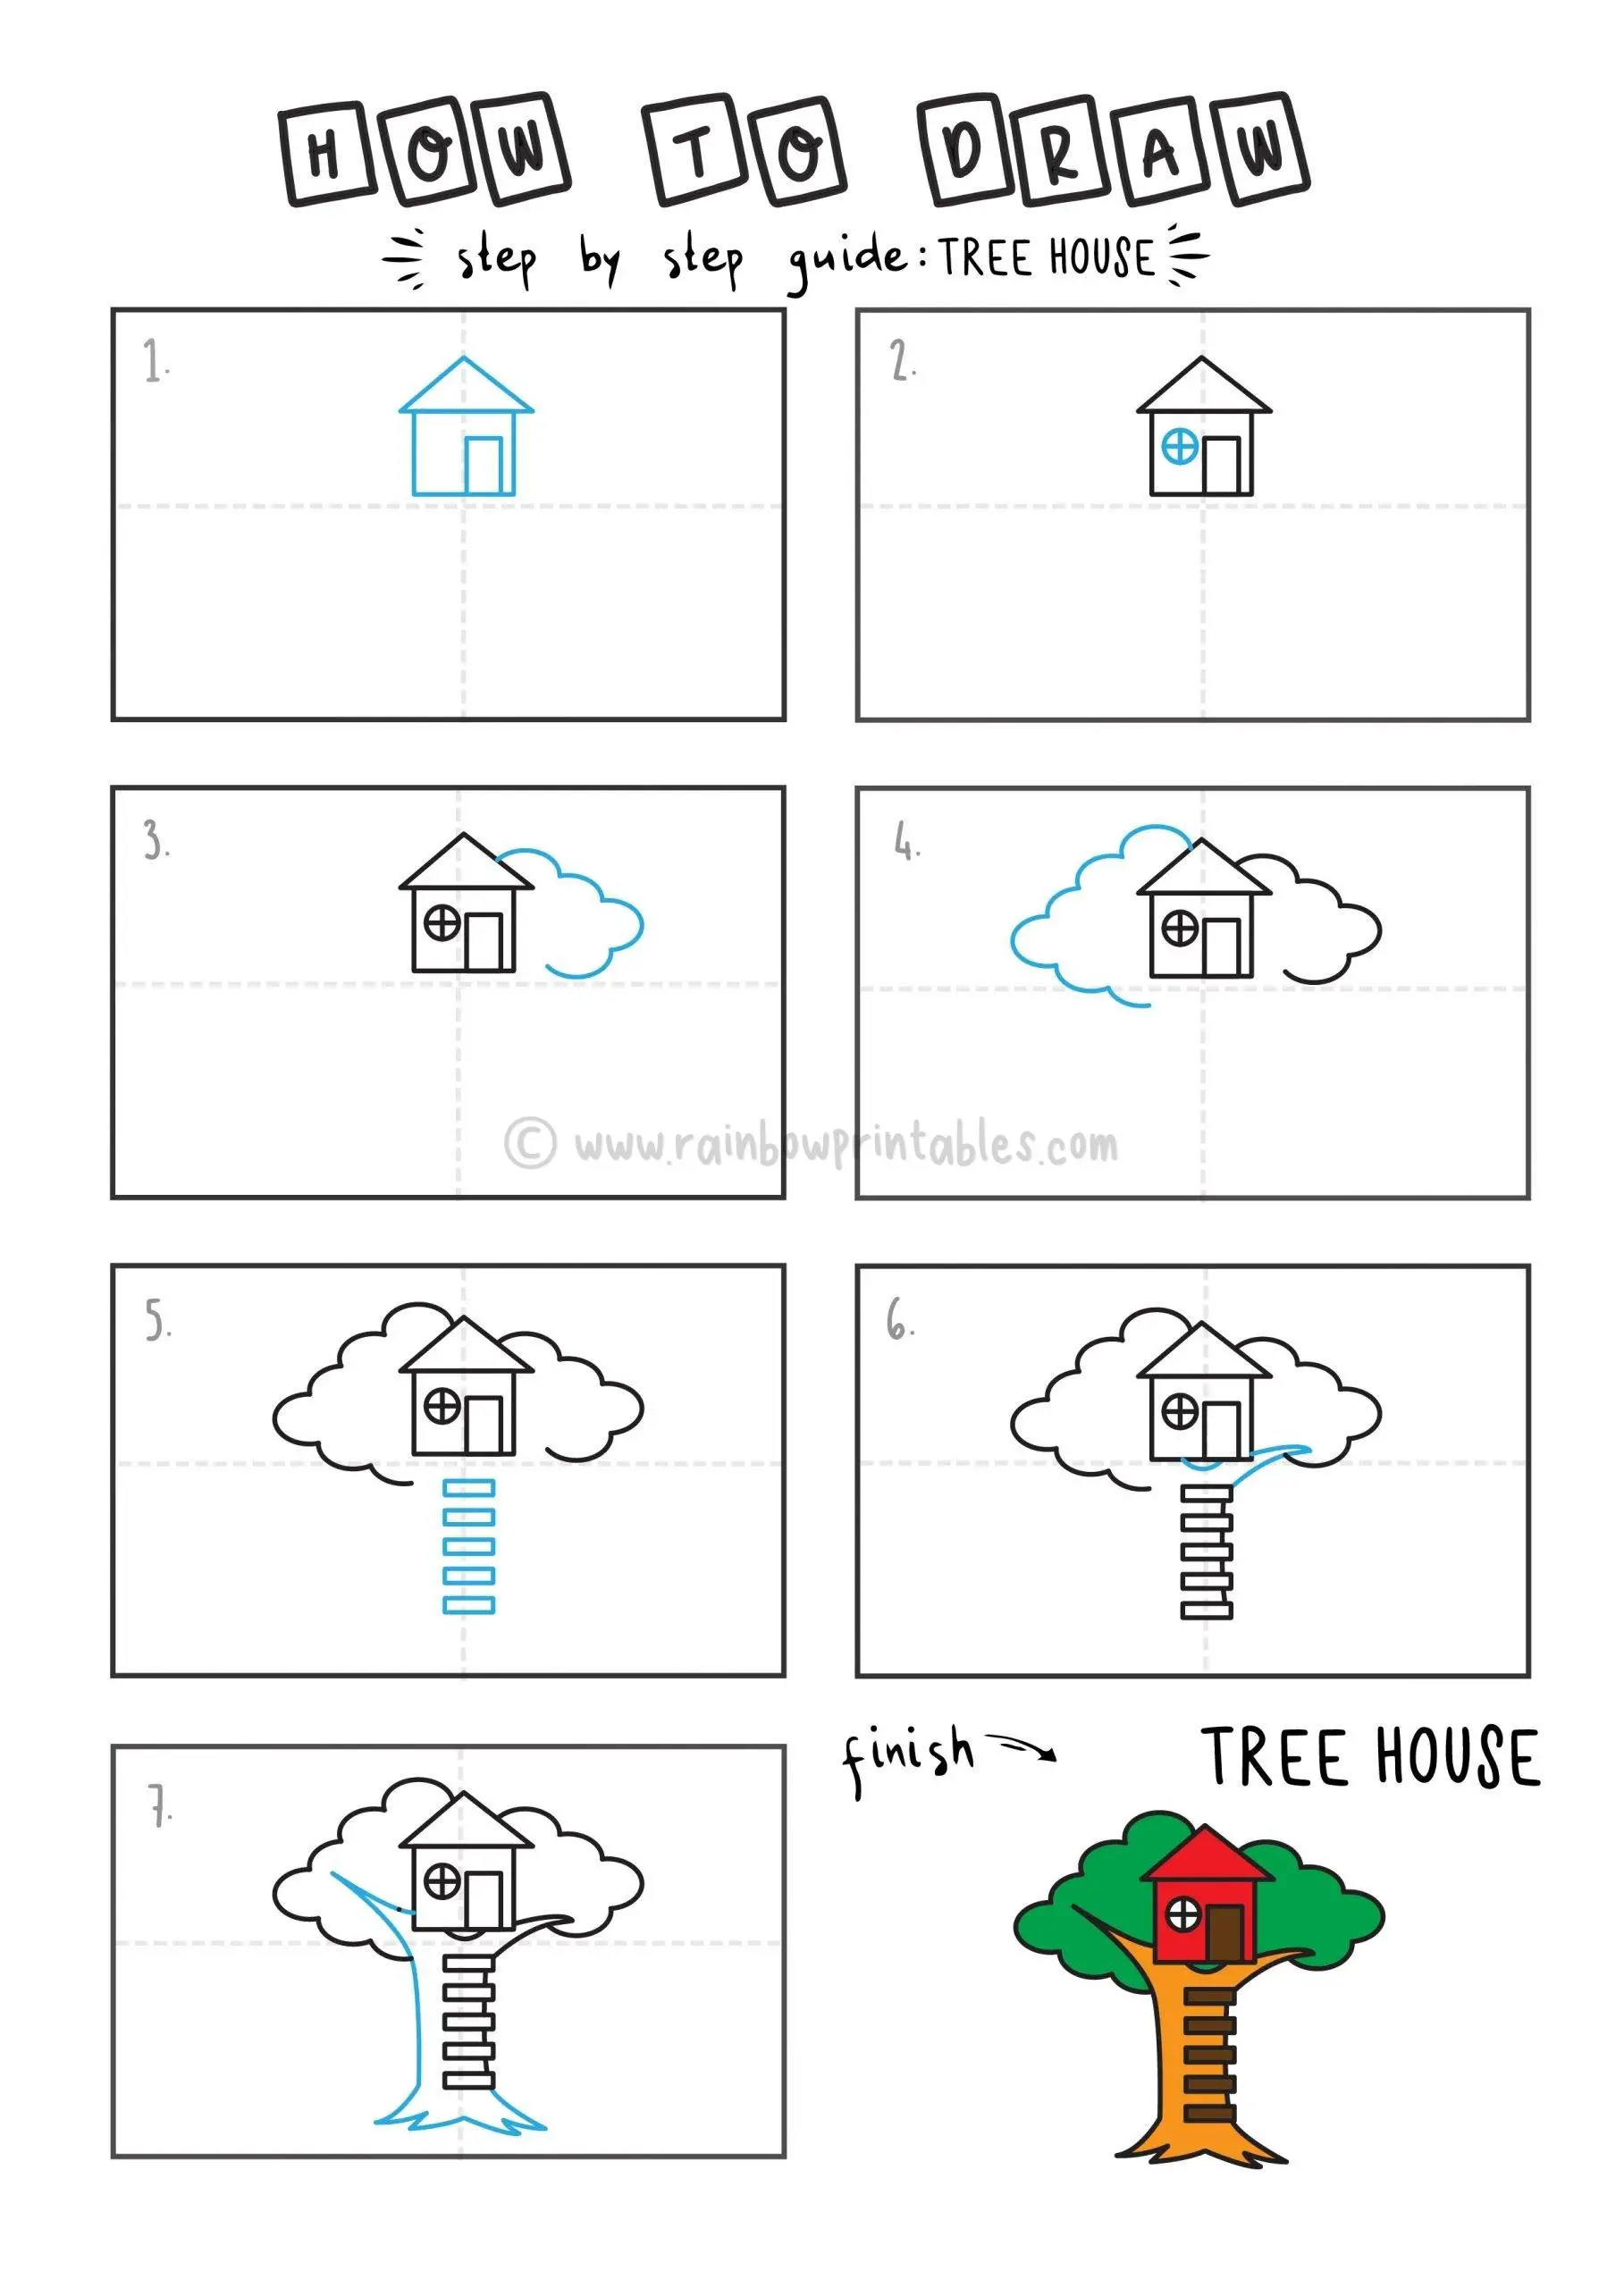 HOW TO DRAW A TREE HOUSE FOR YOUNG KIDS EASY DRAWINGS ART GUIDE STEP BY STEP